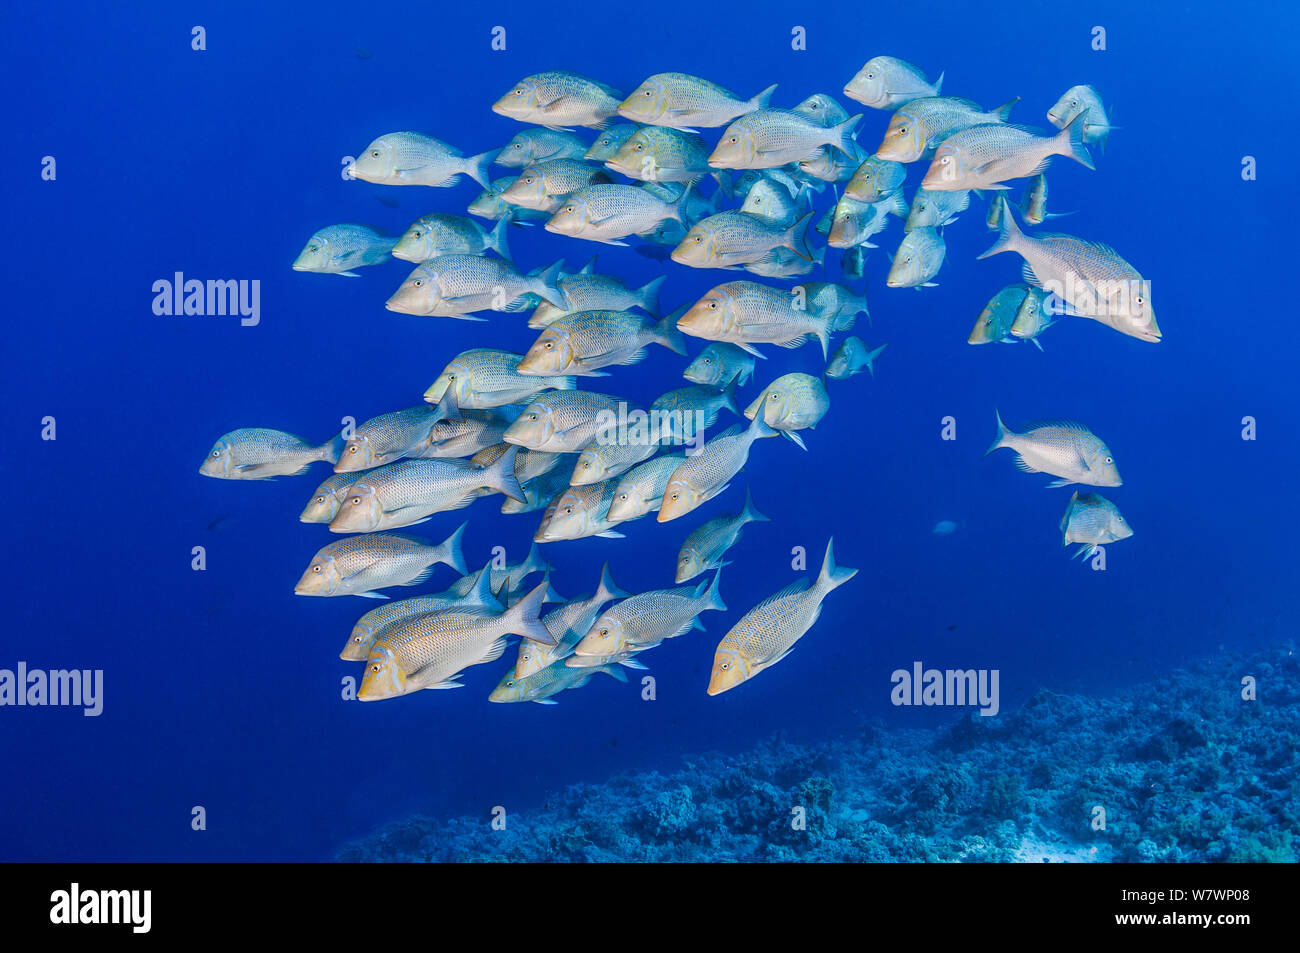 School of Bluescale emperors (Lethrinus nebulosus) gathered for spawning. This species is usually solitary predator on the coral reef. Yolanda Reef, Ras Mohammed Marine Park, Sinai, Egypt. Red Sea. Stock Photo